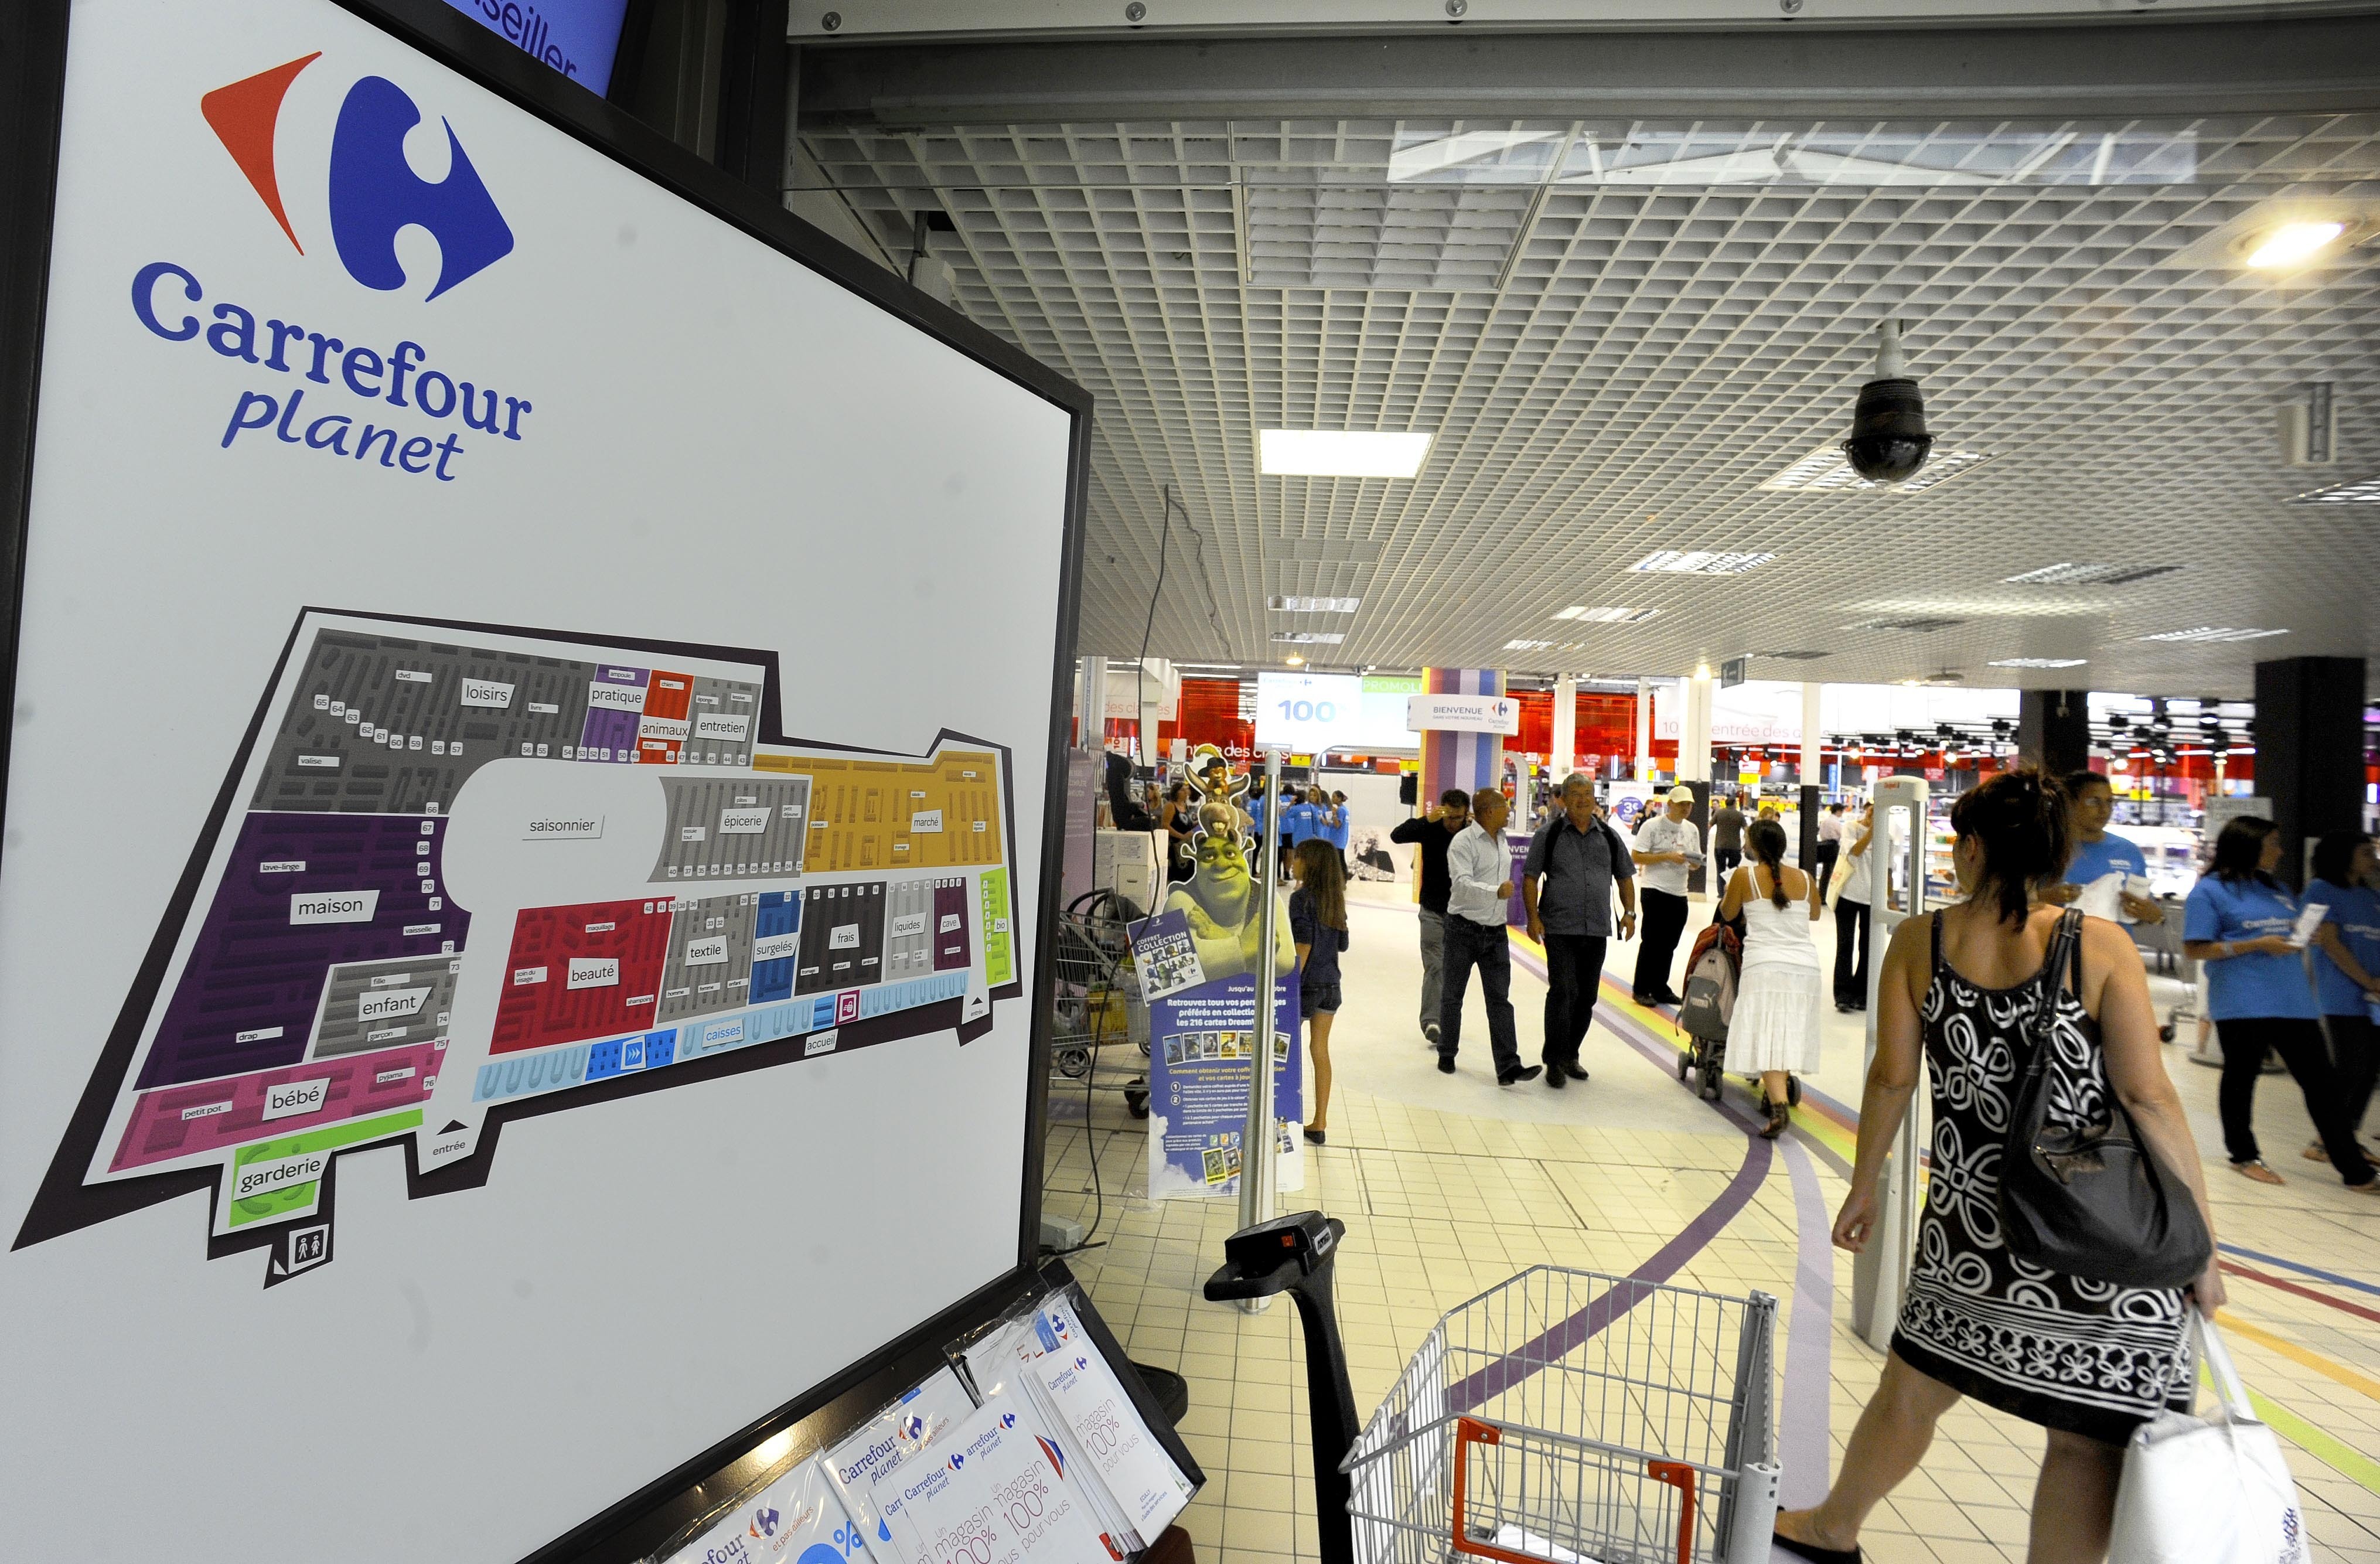 FILE - Shoppers enter the new Carrefour store Wednesday Aug. 25, 2010 in Ecully, near Lyon, central France. Carrefour has unveiled its hypermarket reinvention project at two stores in Lyon. The Ecully and Venissieux host the Carrefour Planet concept. The stores split into nine zones, including a 'discovery' store for events and seasonally themed products. (AP Photo/Thomas Campagne, File)